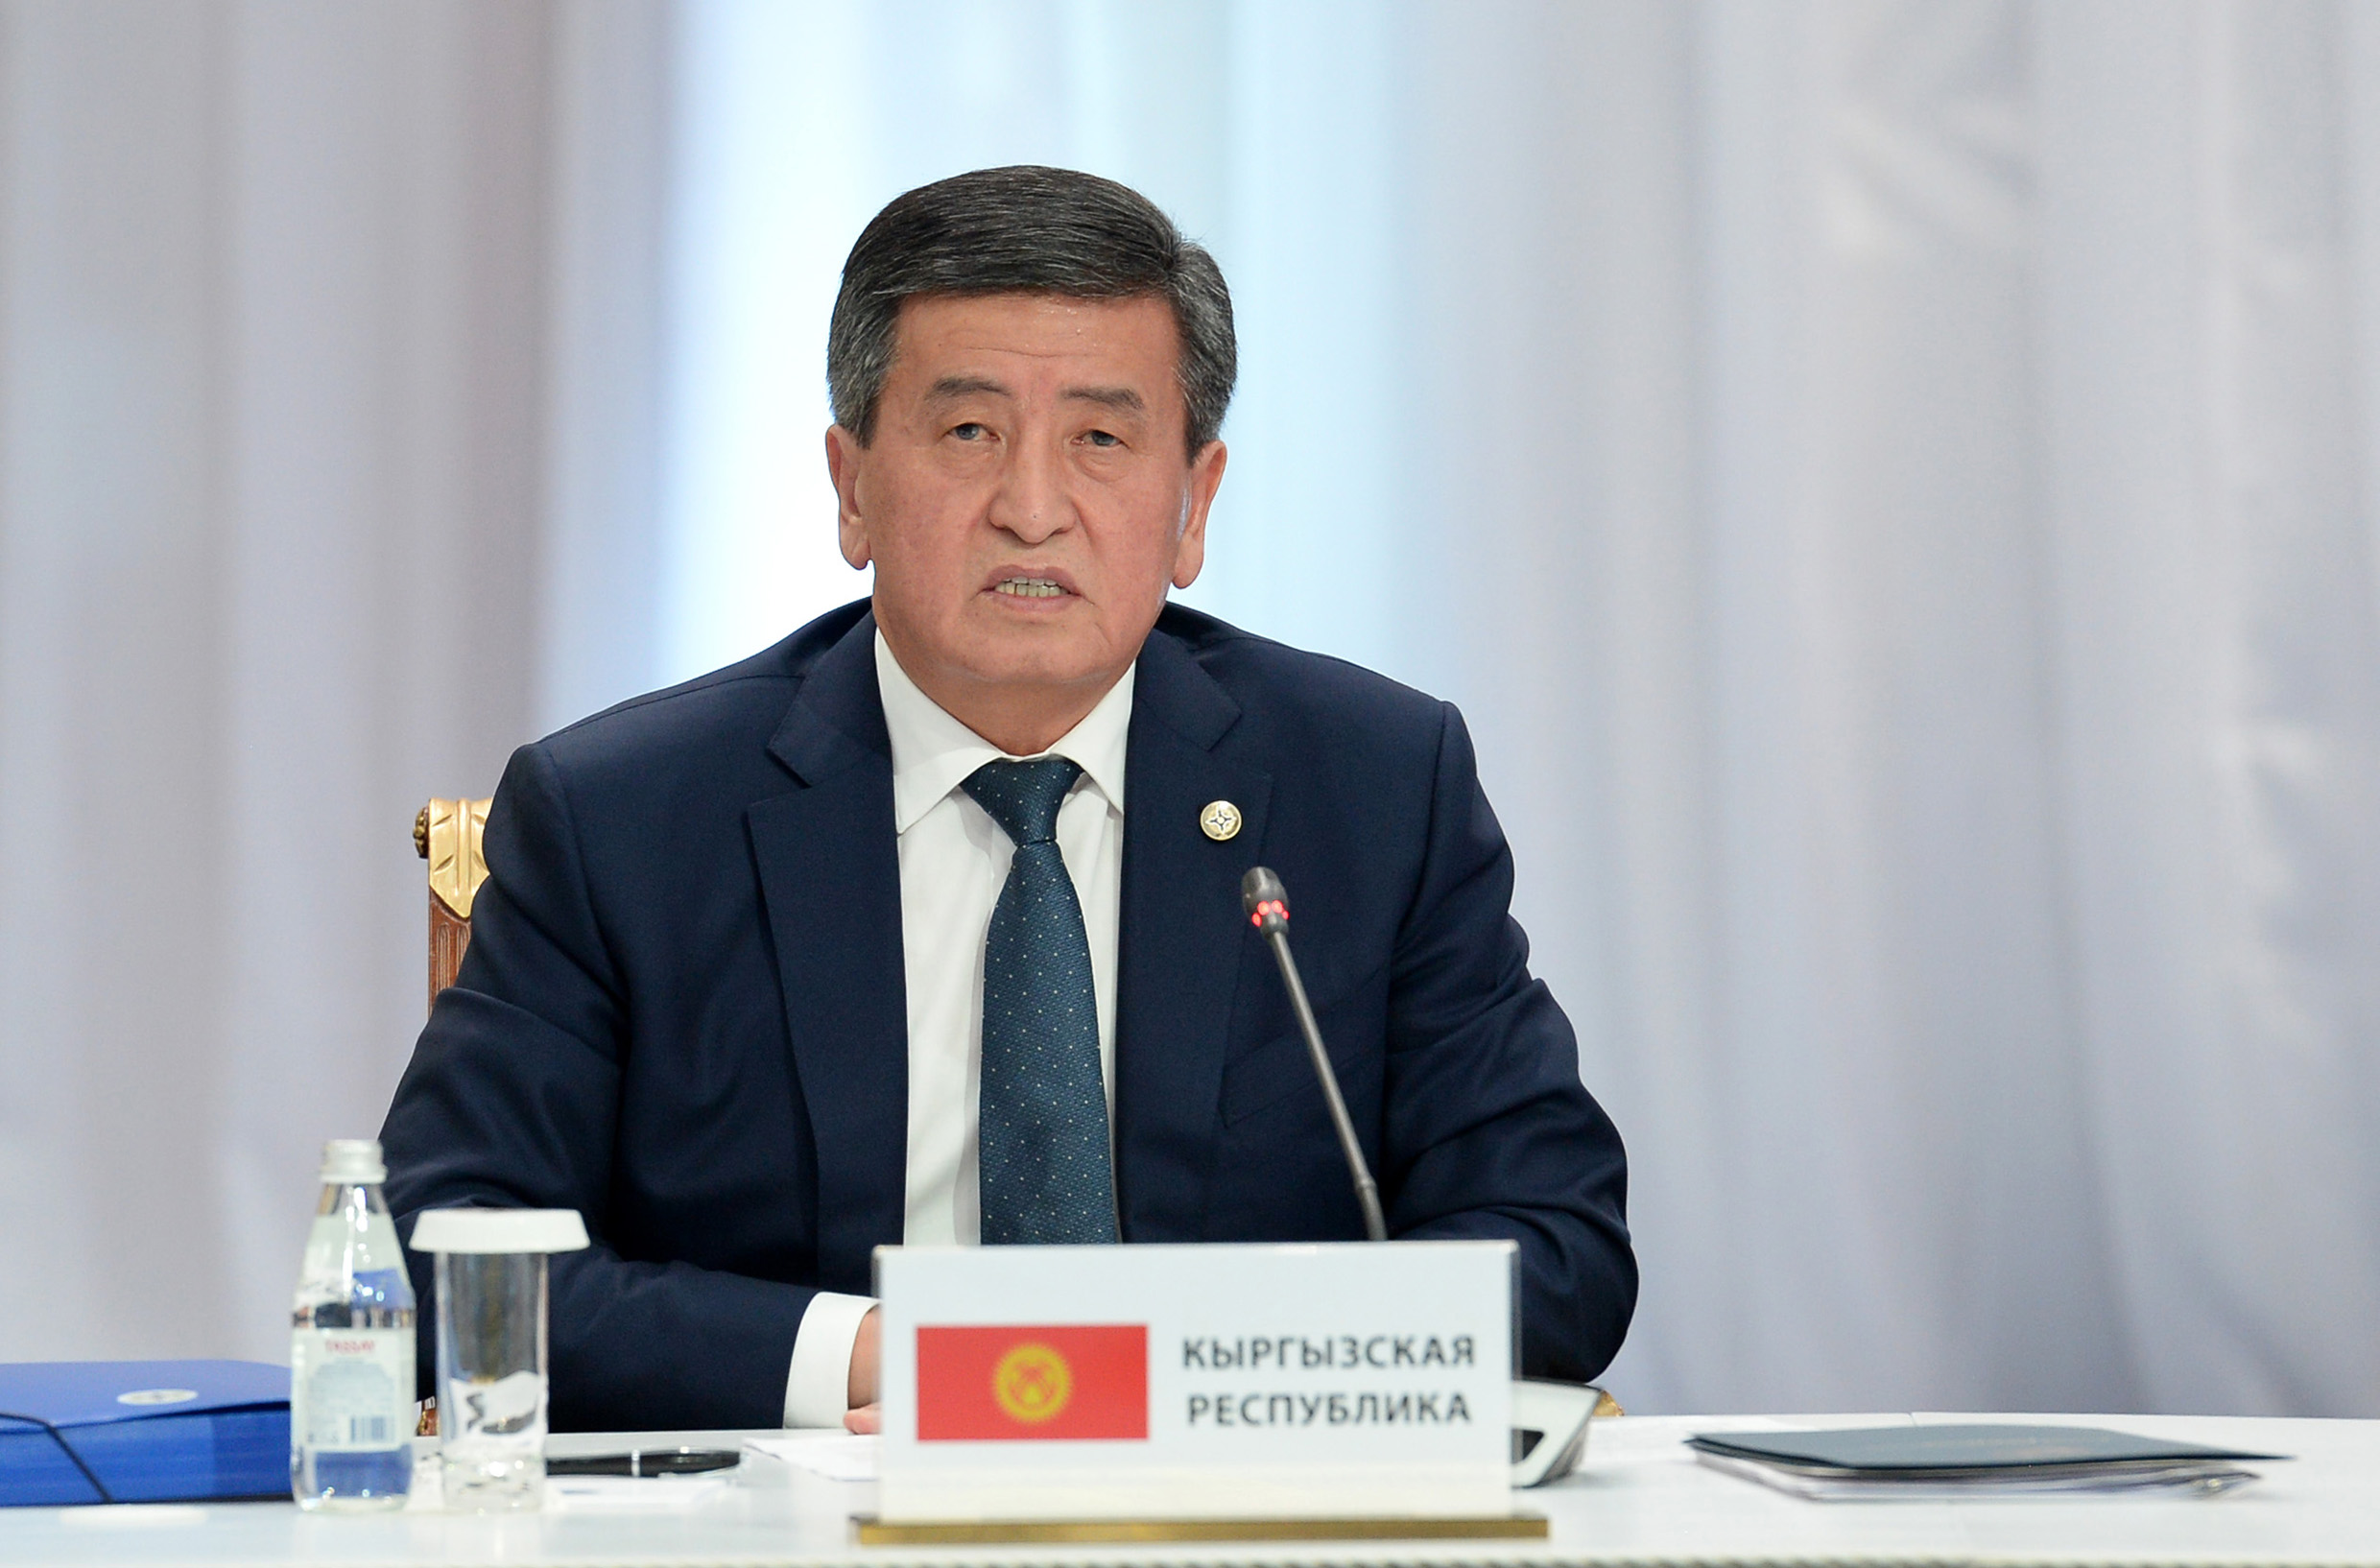 Kyrgyzstan: Officials muted in first words on Xinjiang crackdown